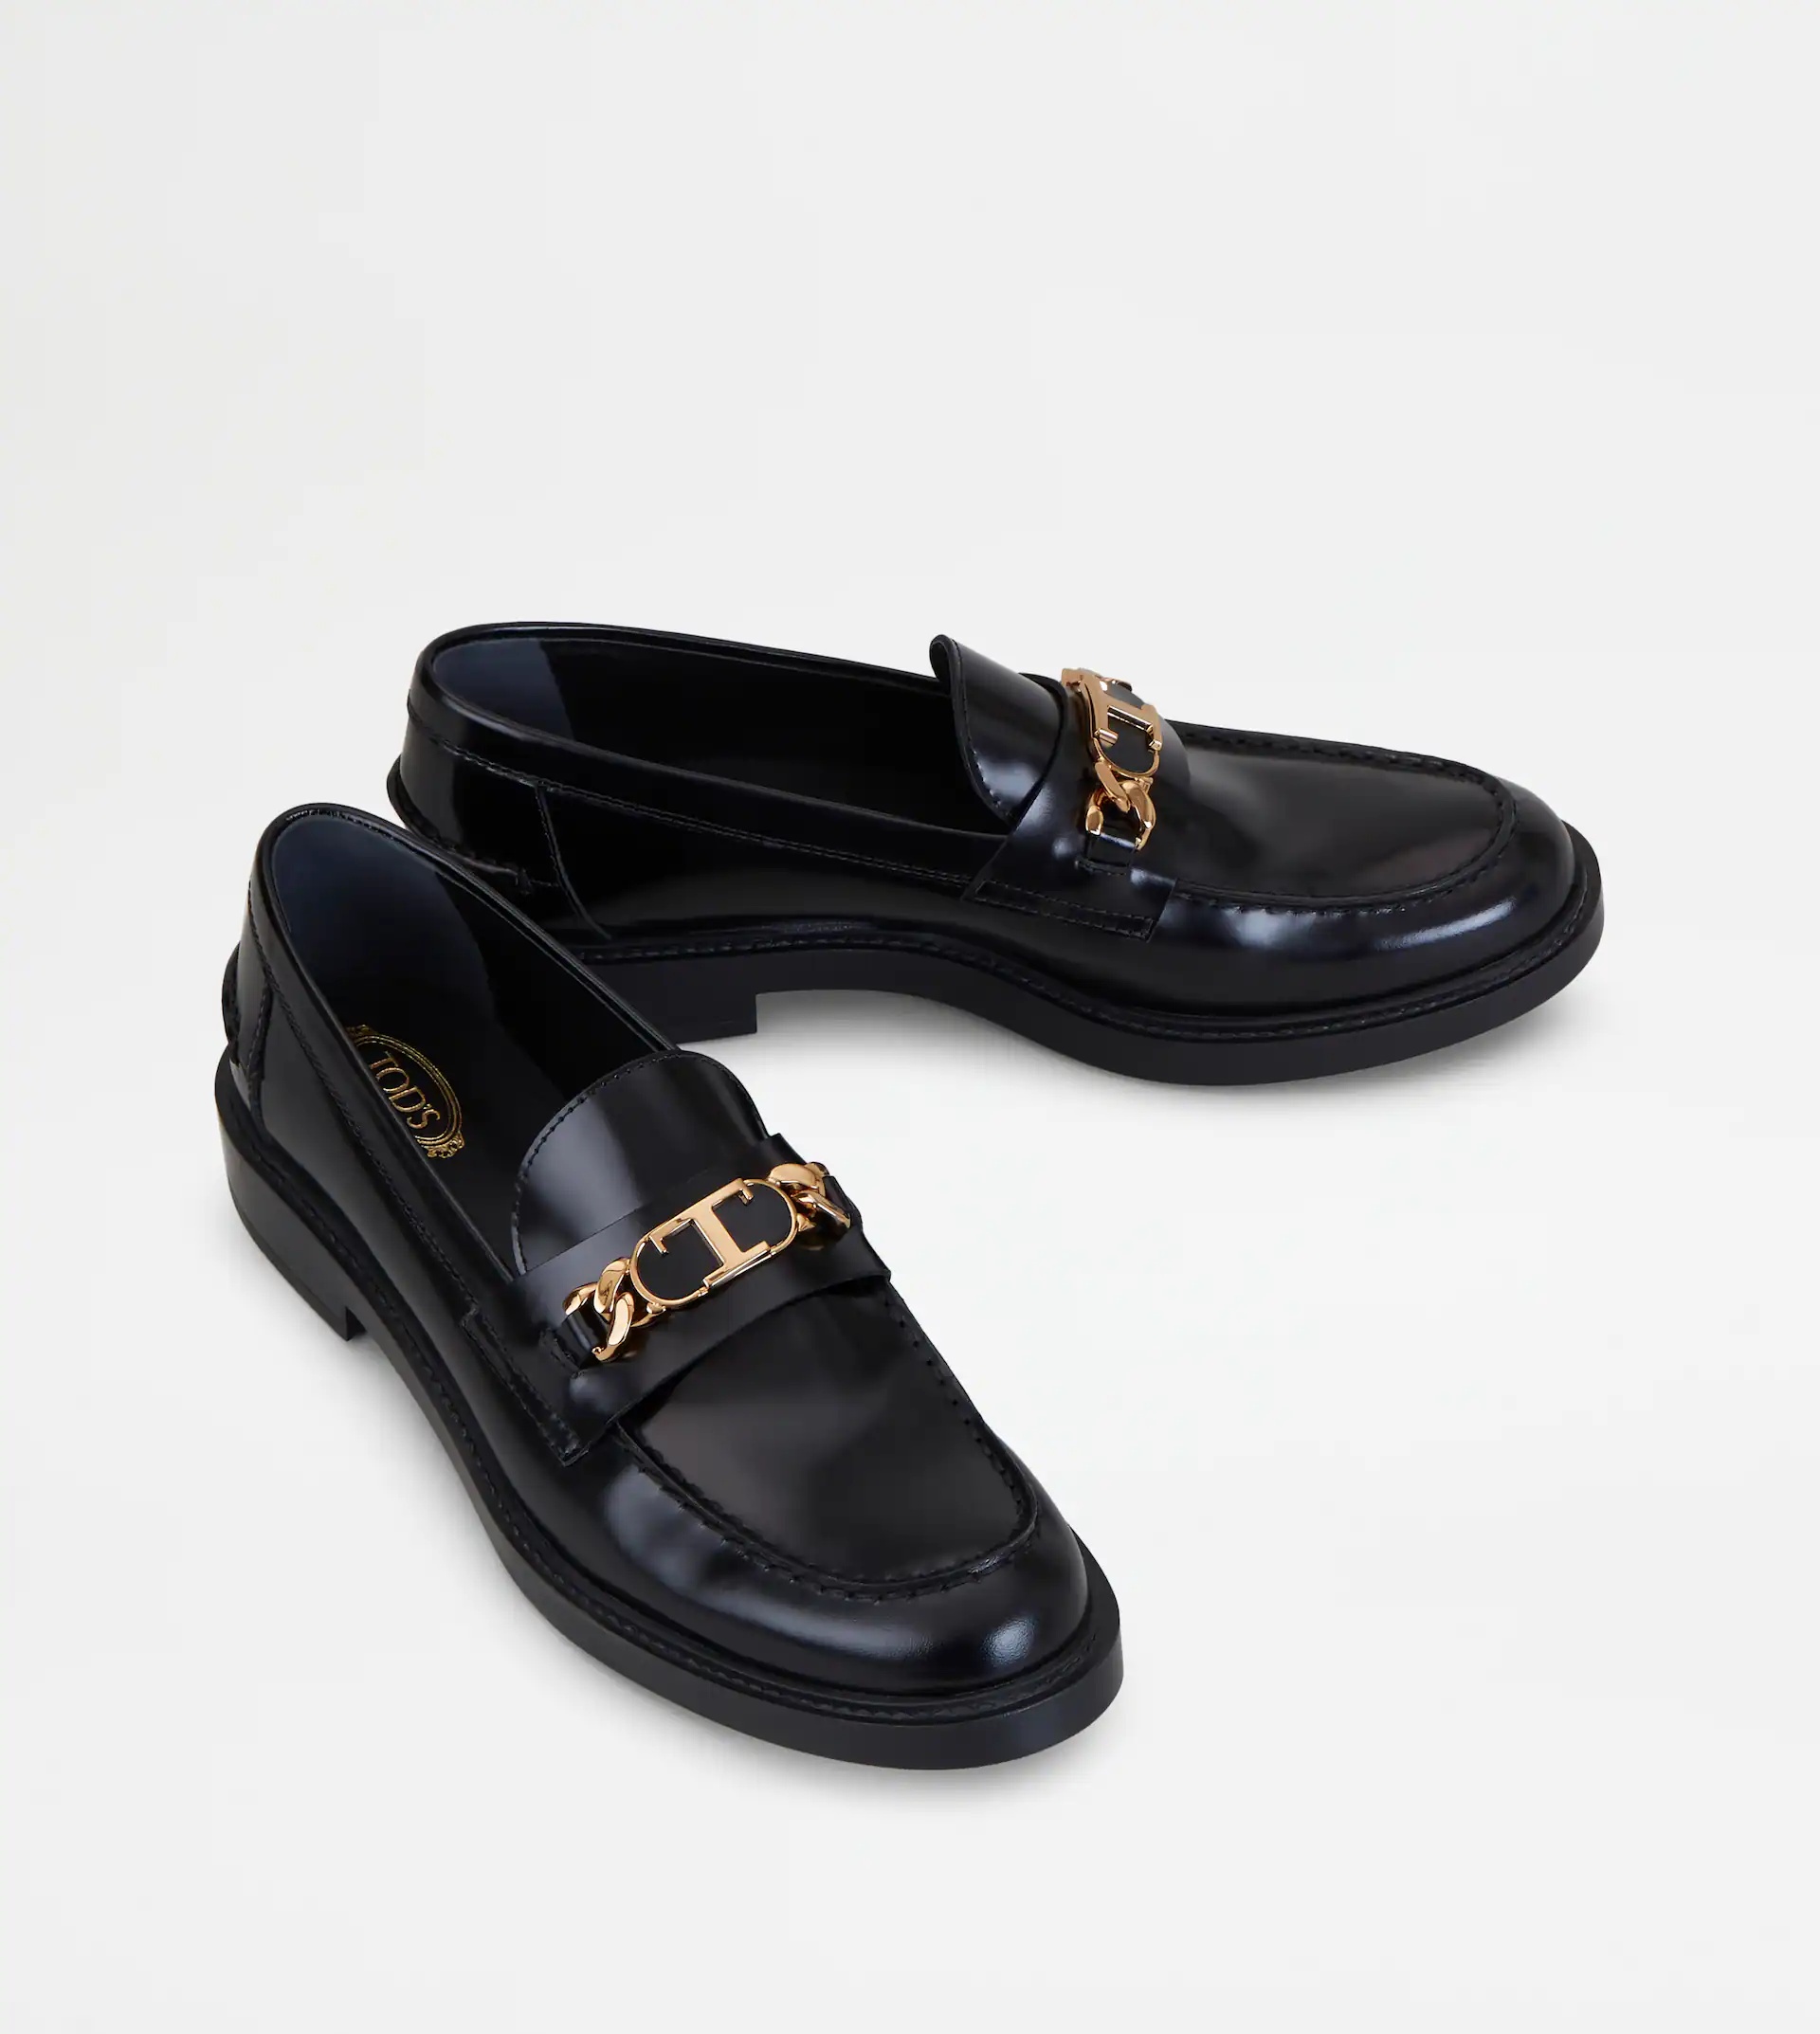 LOAFERS IN LEATHER - BLACK - 4